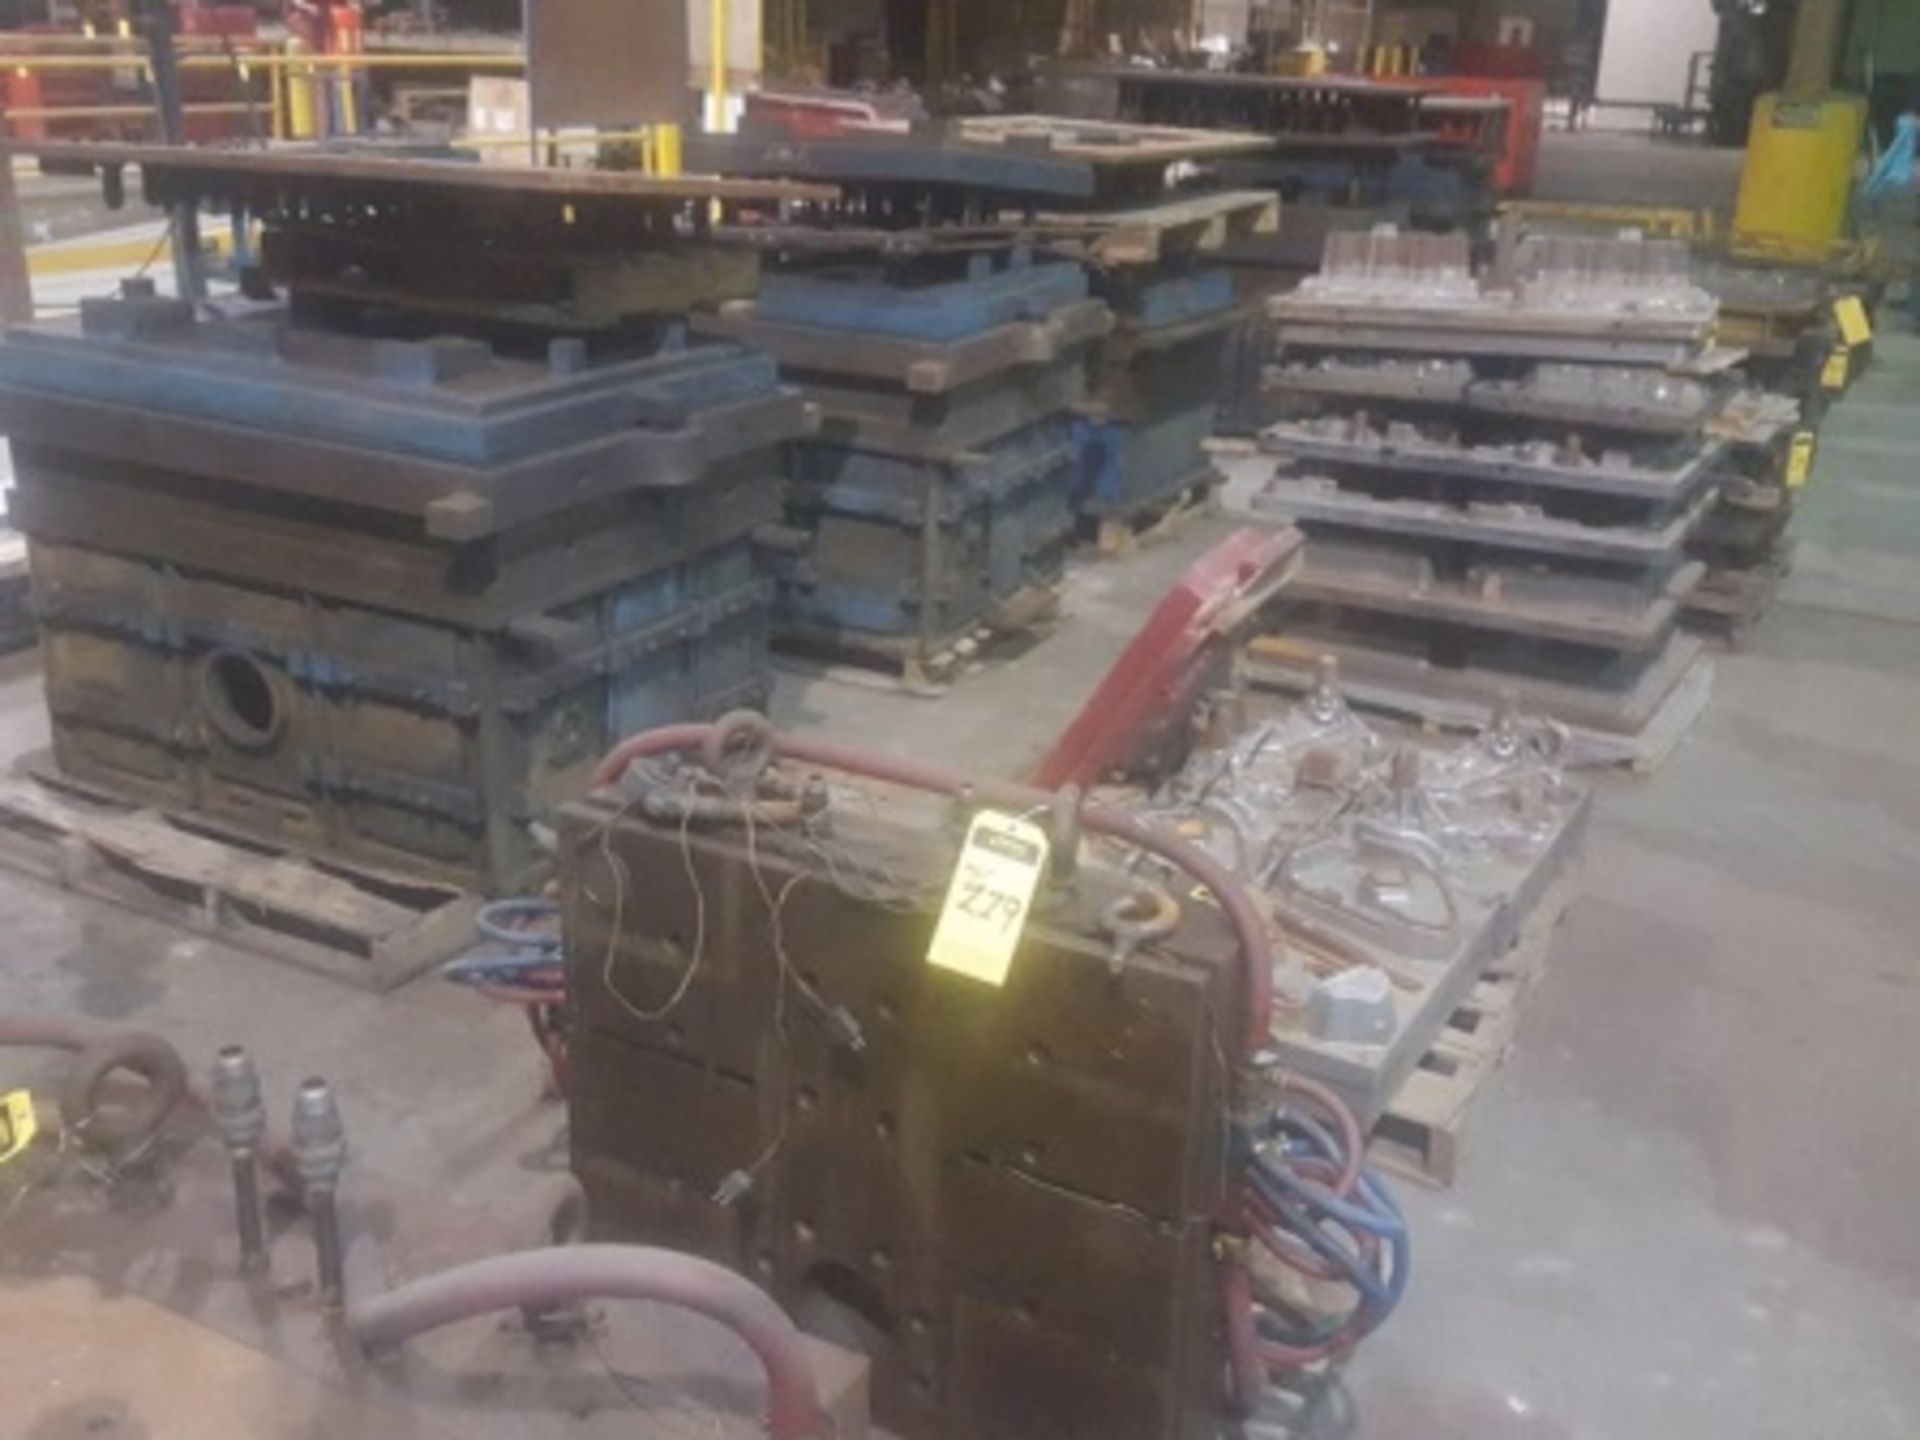 (10) Pallets of casting molds for aluminum intake manifolds for automotive engines - Image 11 of 11